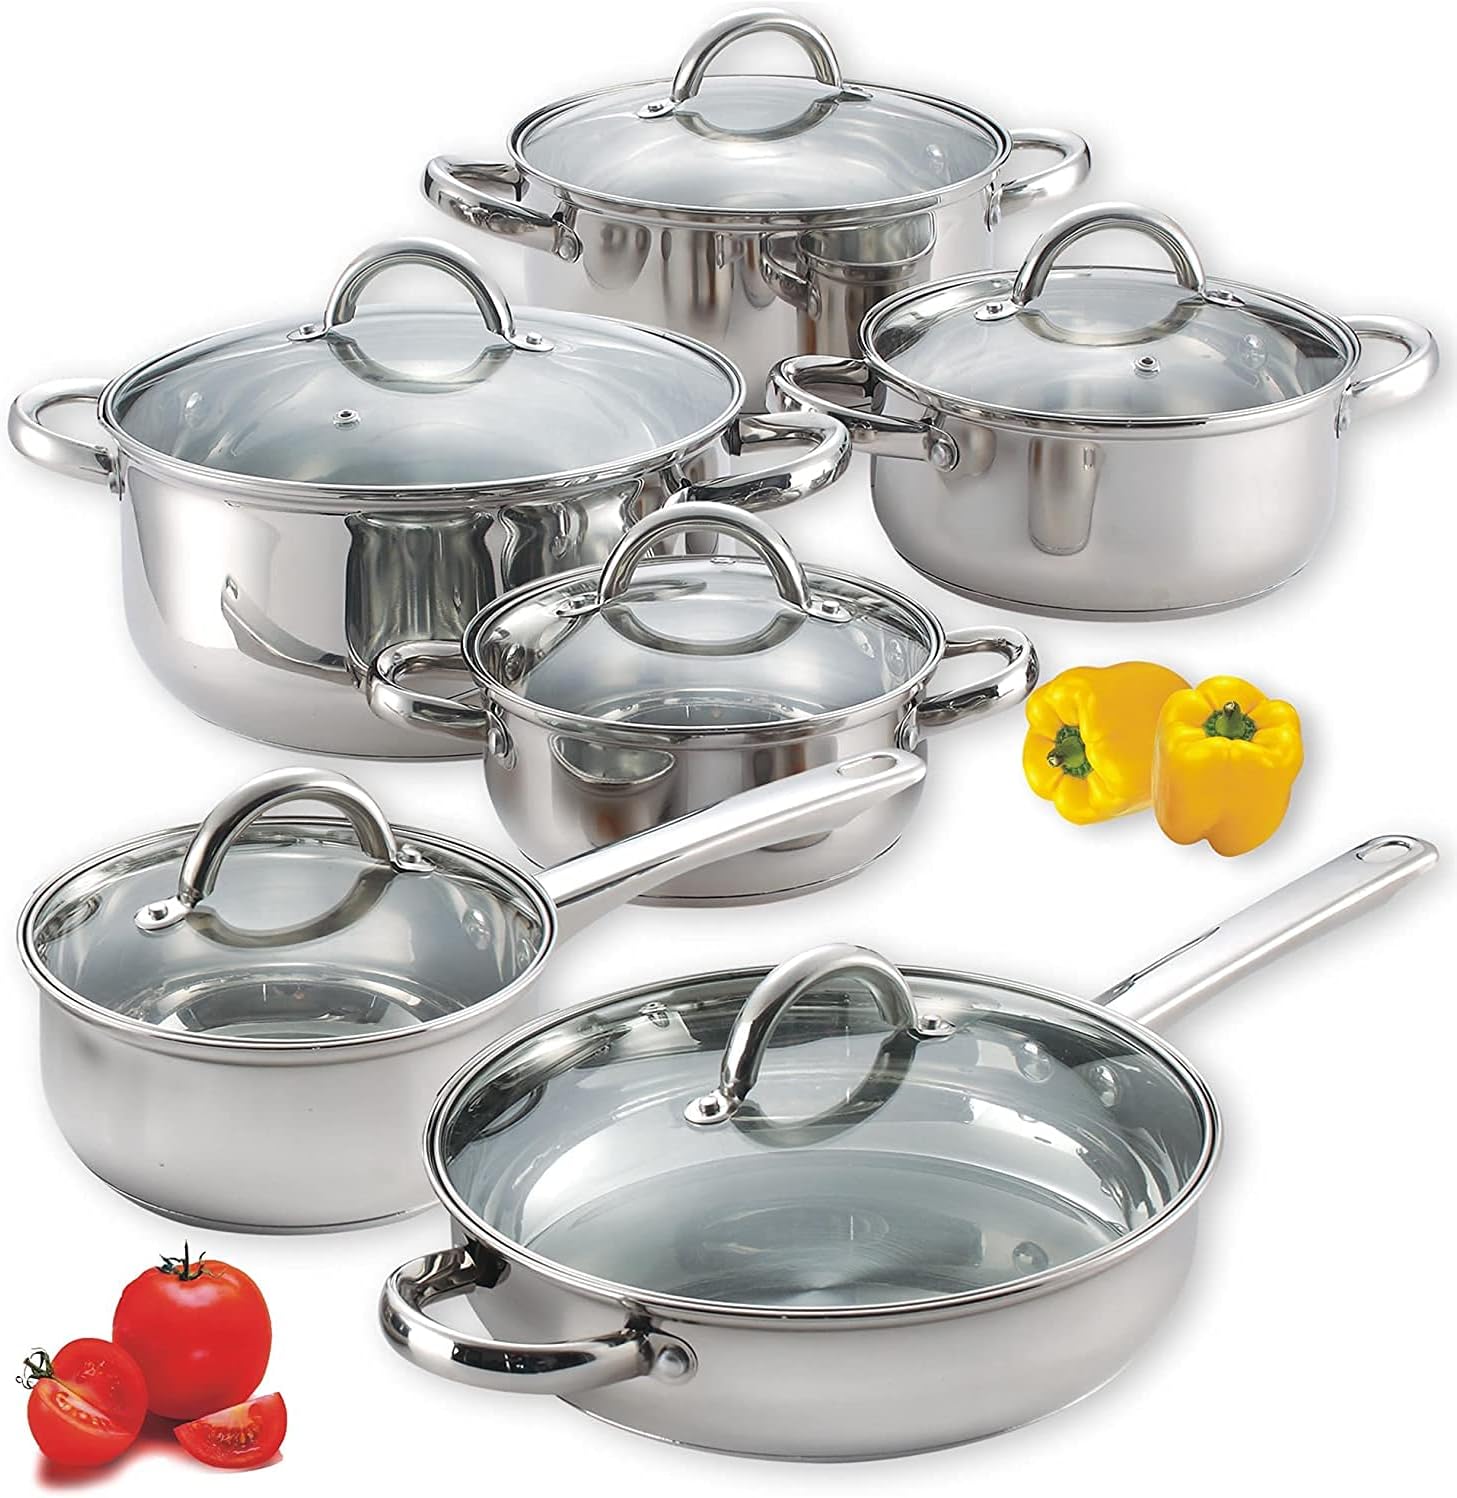 Why Home Cooks Should Use Stainless Steel Cookware